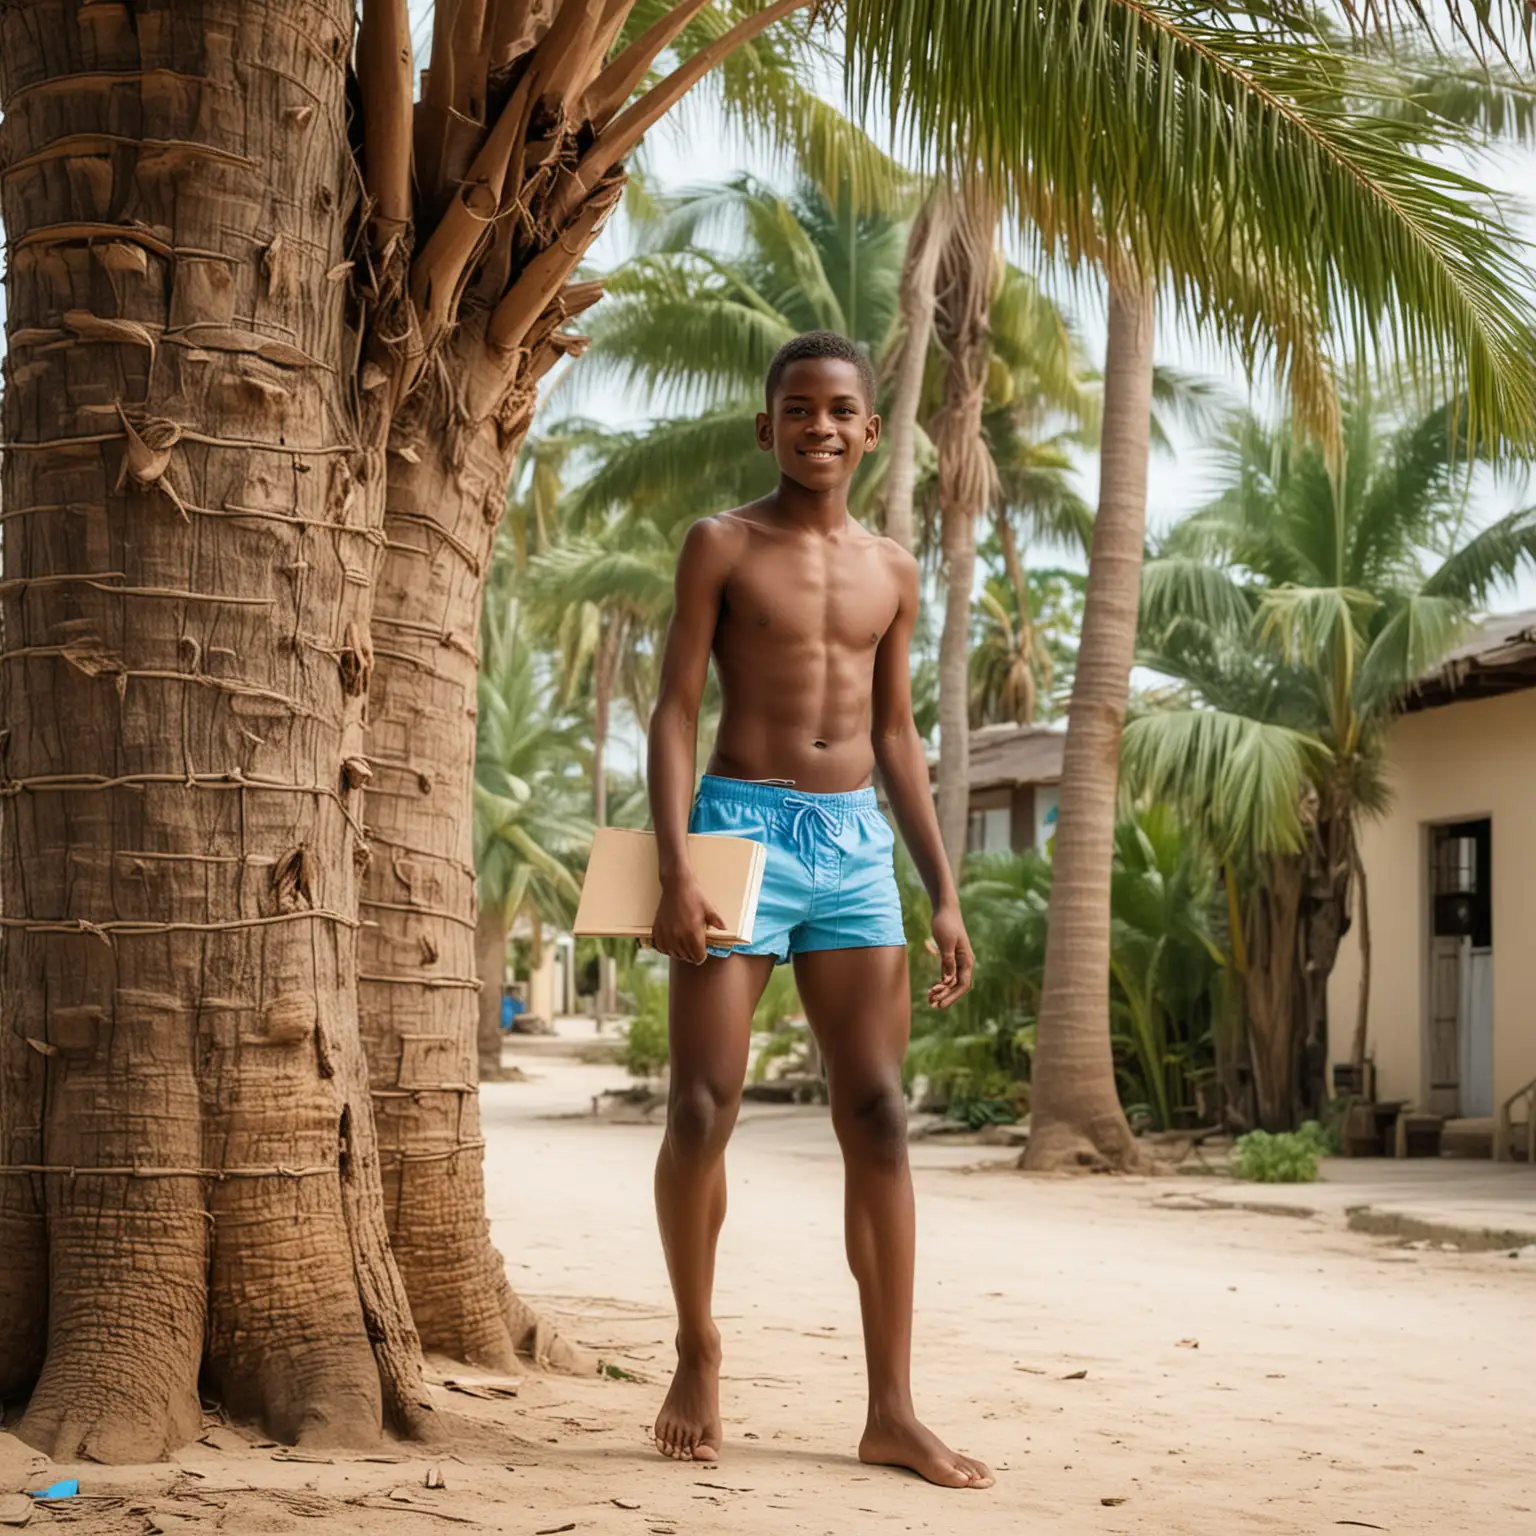 shirtless black boy barefoot with blue shorts holding book in village palm tree